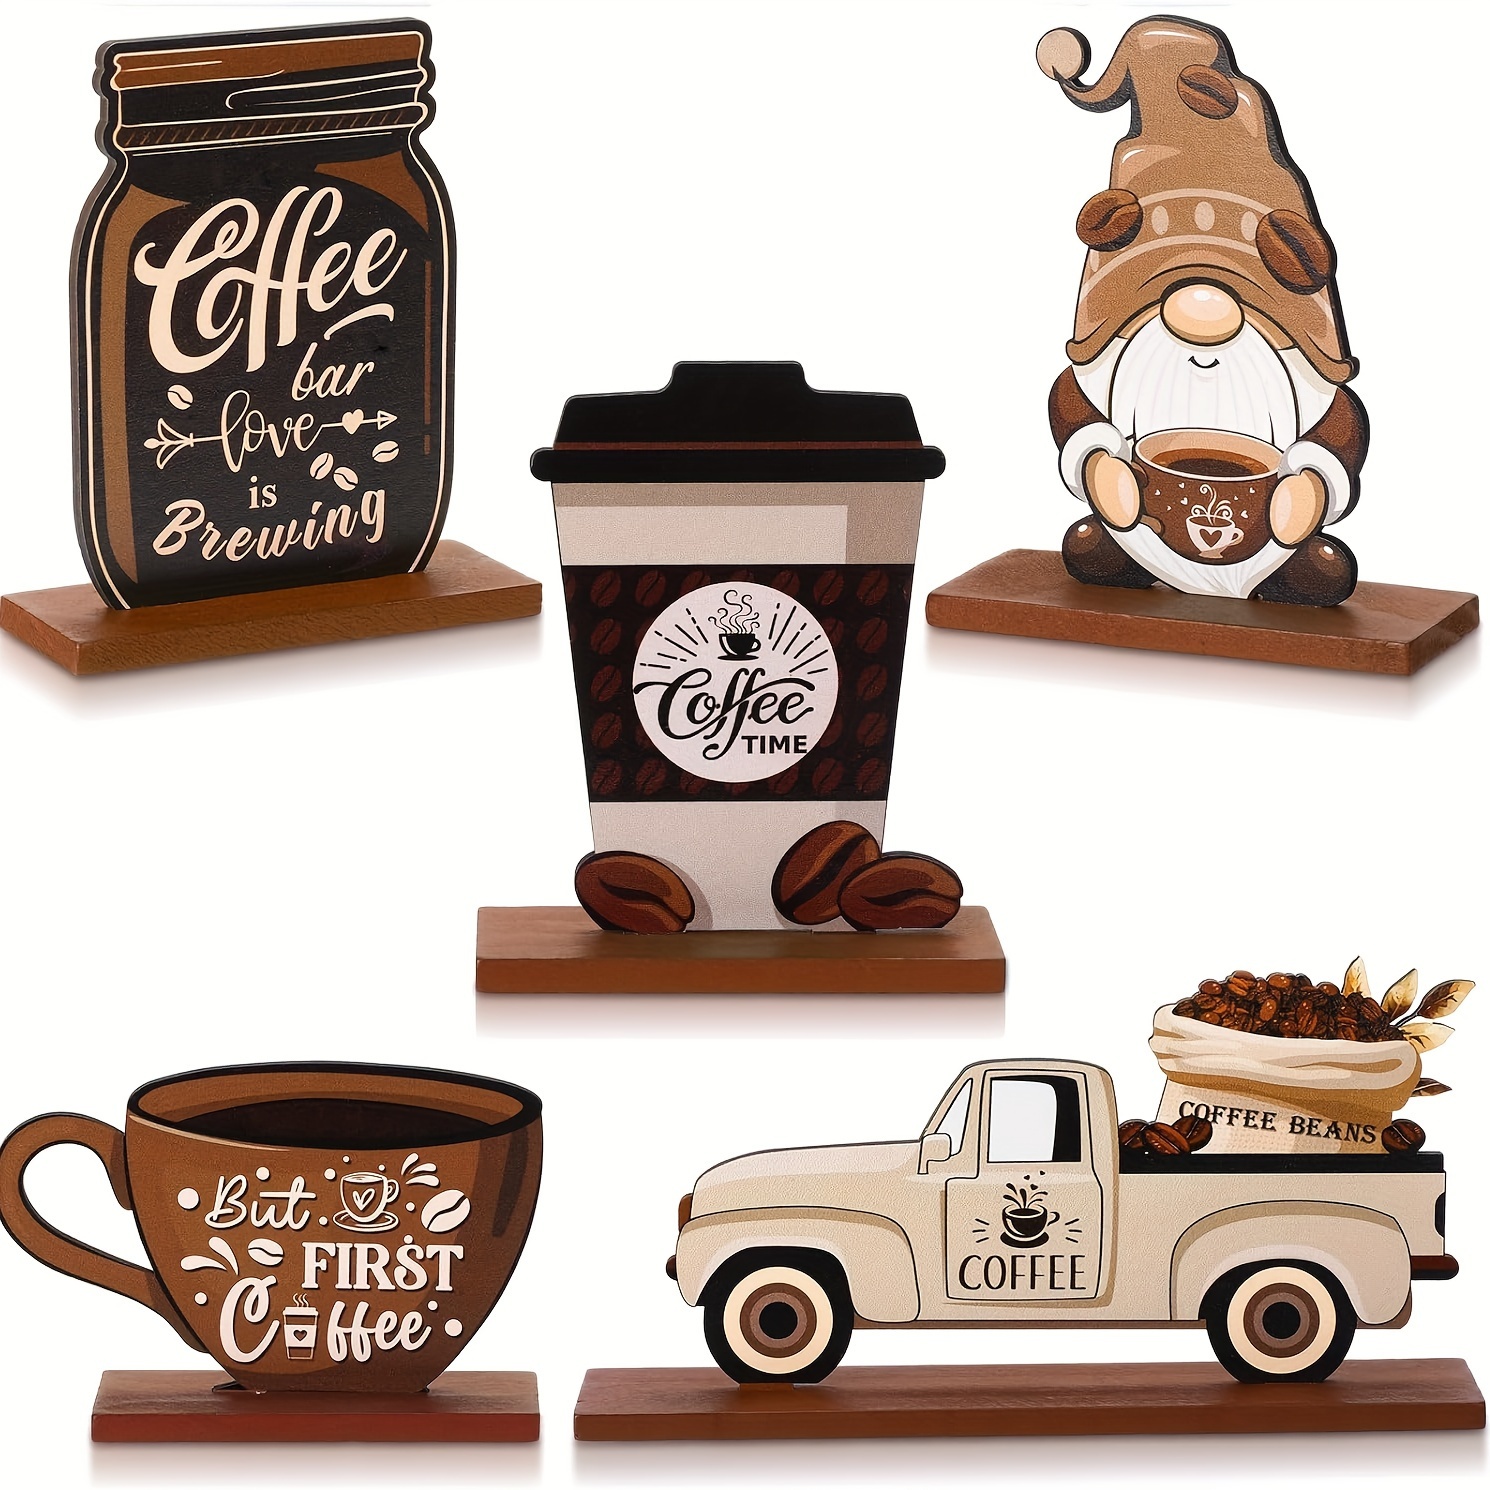 

Vintage Coffee Shop Decor Set - Wooden Gnome & Car Figurines, Mocha Coffee Accents For Kitchen, Living Room, Bedroom - Artistic Crafts For Home And Gallery Display Coffee Bar Decor Coffee Decor